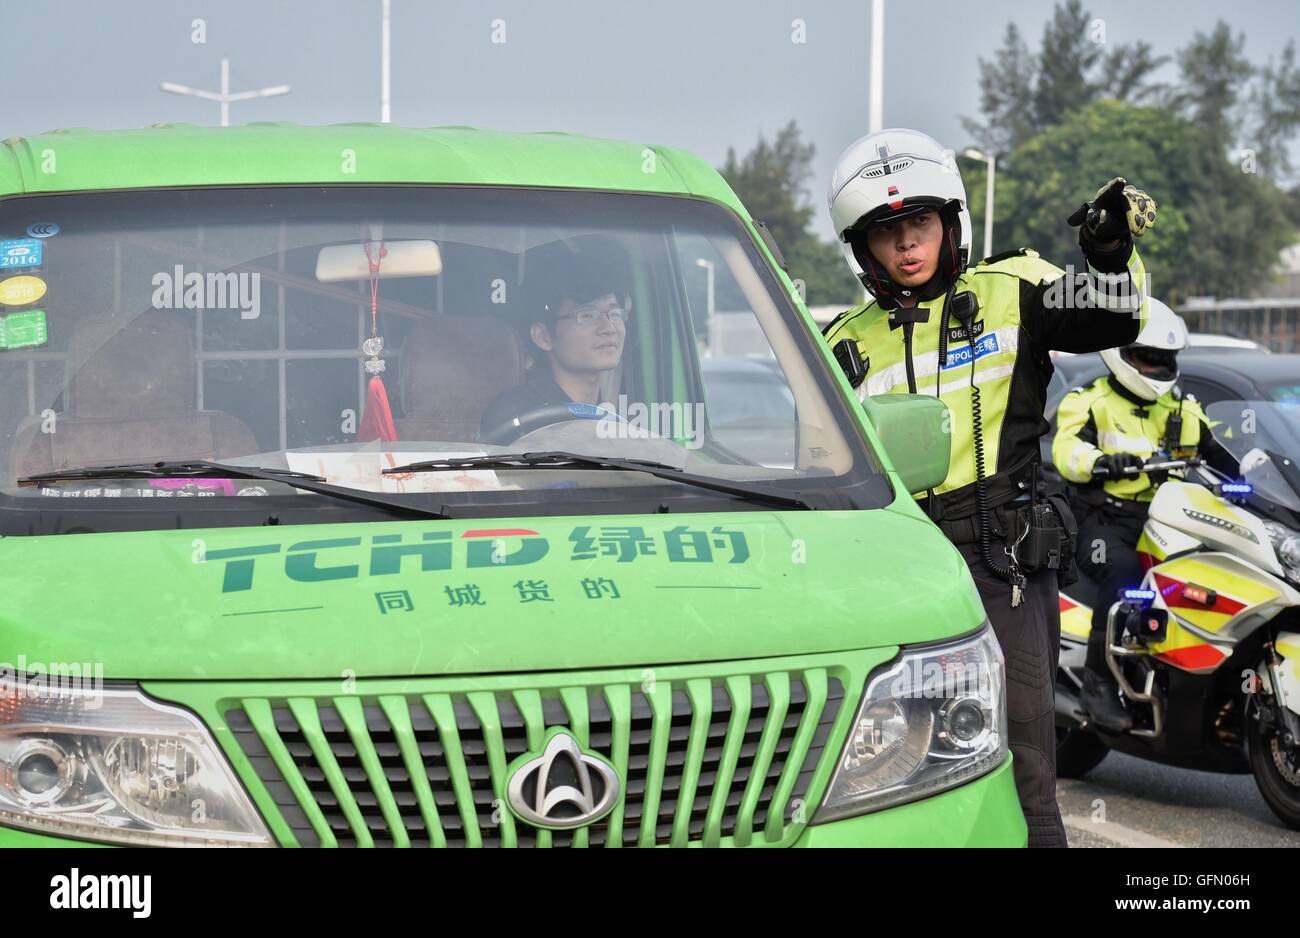 Shenzhen, China's Guangdong Province. 1st Aug, 2016. A traffic policeman provides instructions to a driver at a high-occupancy vehicle lane (HOV lane) in Shenzhen, south China's Guangdong Province, Aug. 1, 2016. Shenzhen's first HOV lane was put into use on Monday to increase average vehicle occupancy with the goal of reducing traffic congestion and air pollution. © Mao Siqian/Xinhua/Alamy Live News Stock Photo